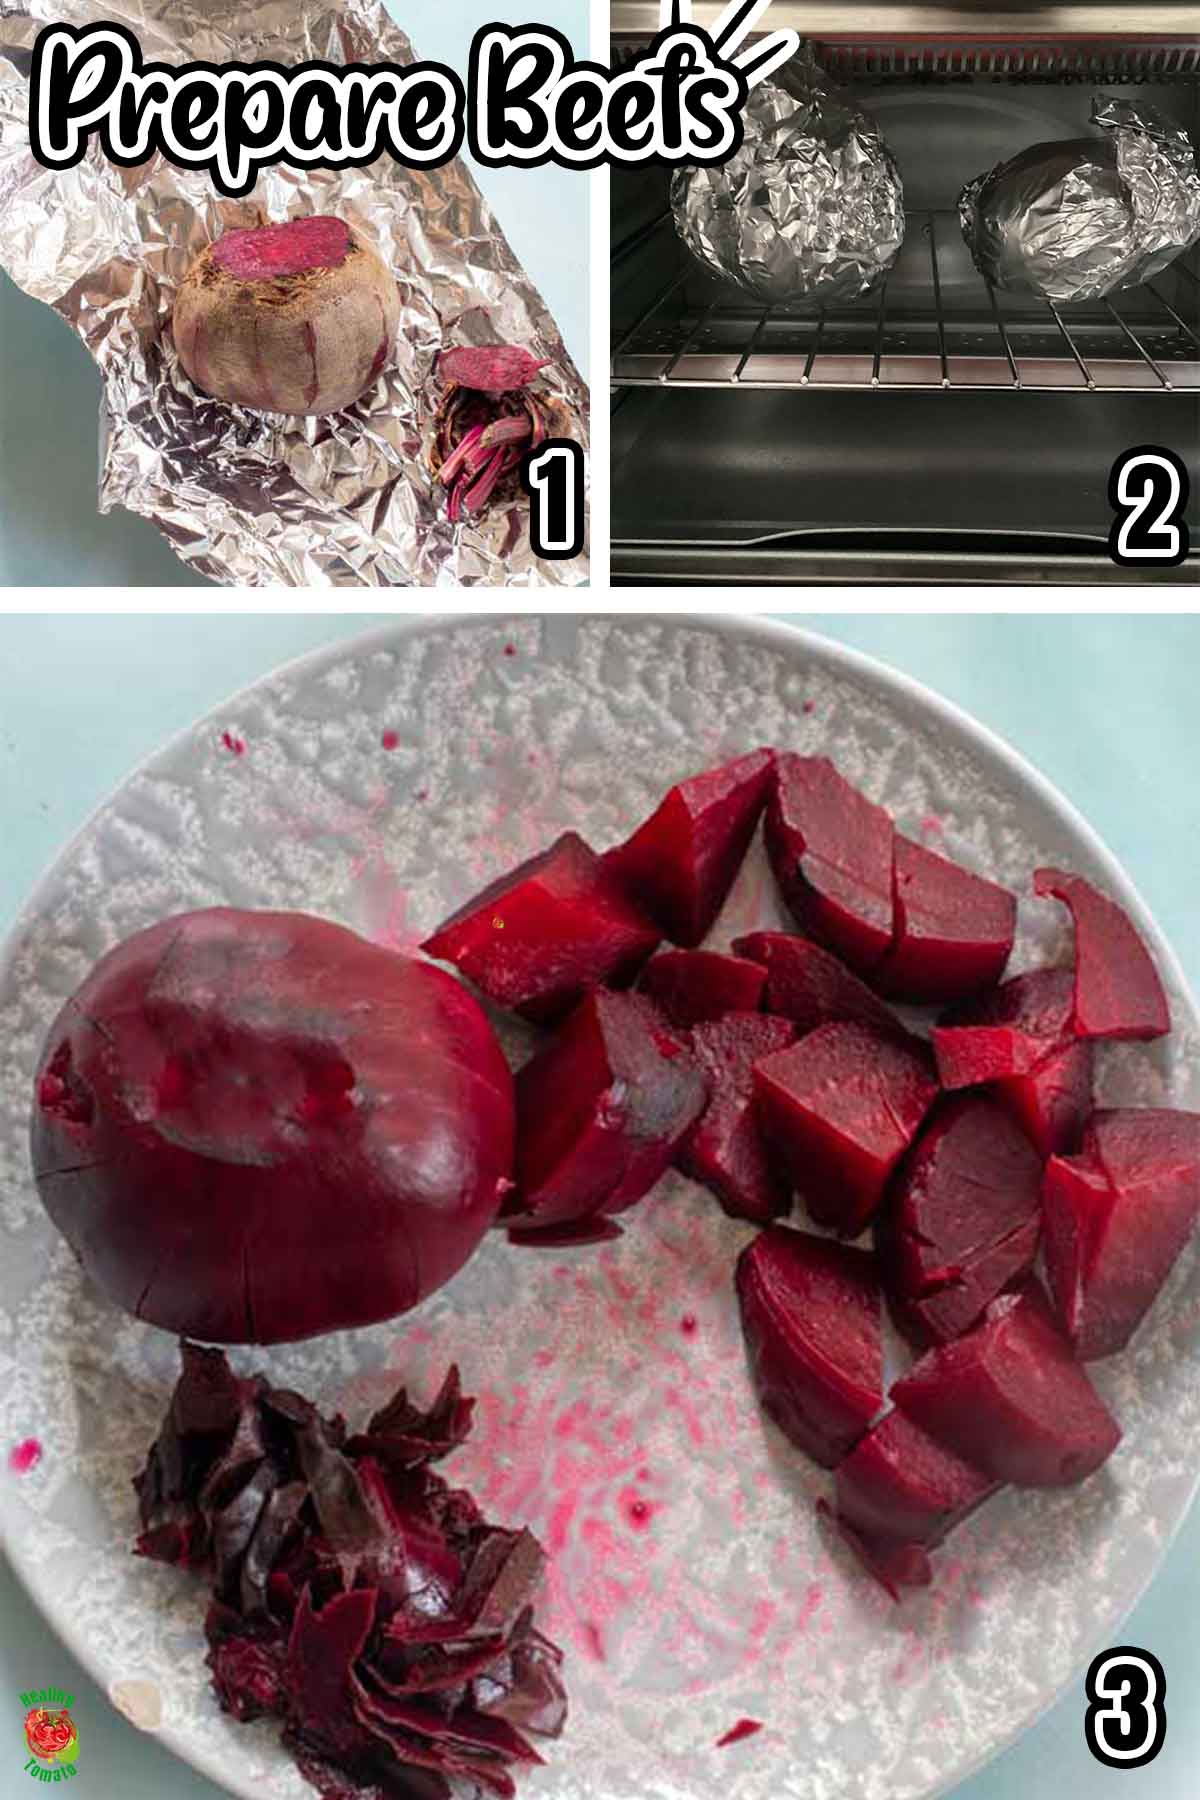 Top view of one whole beet, one beet roughly copped and the skin of one beet. All on a grey plate